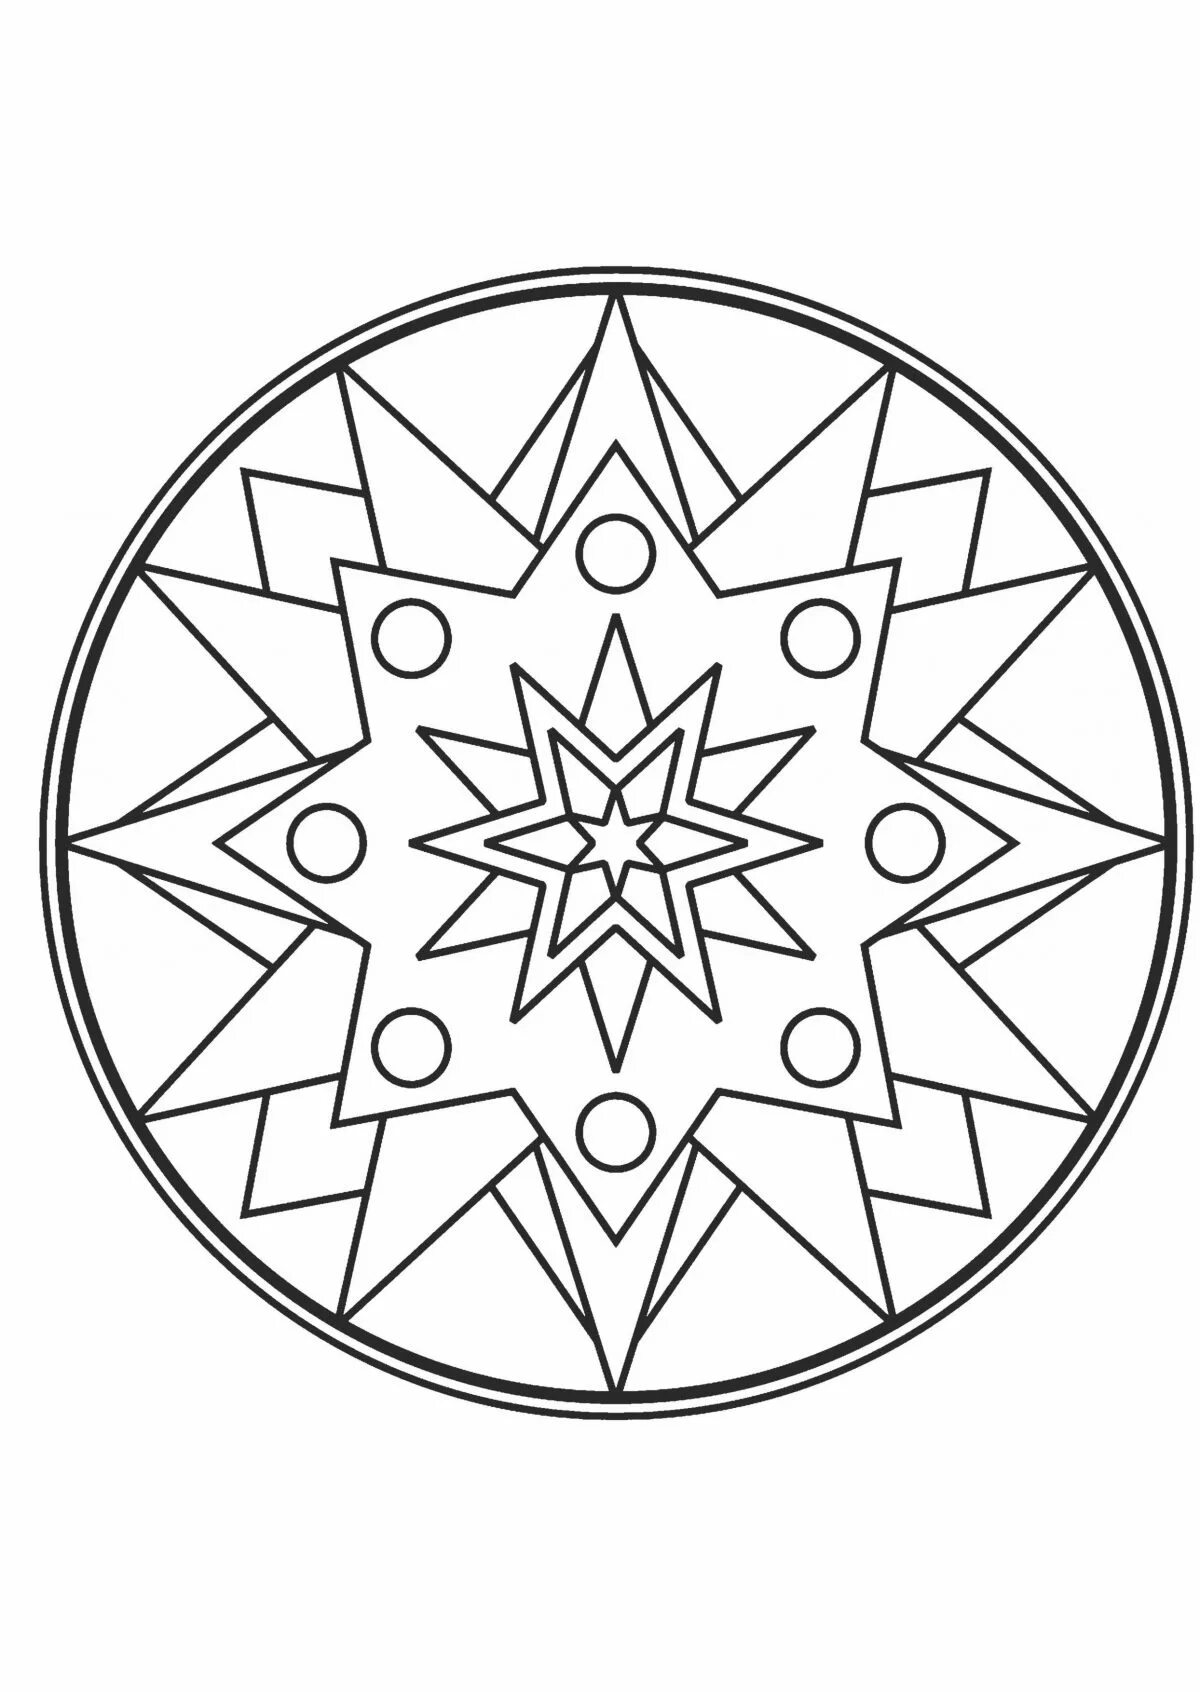 Coloring page with bright circular pattern